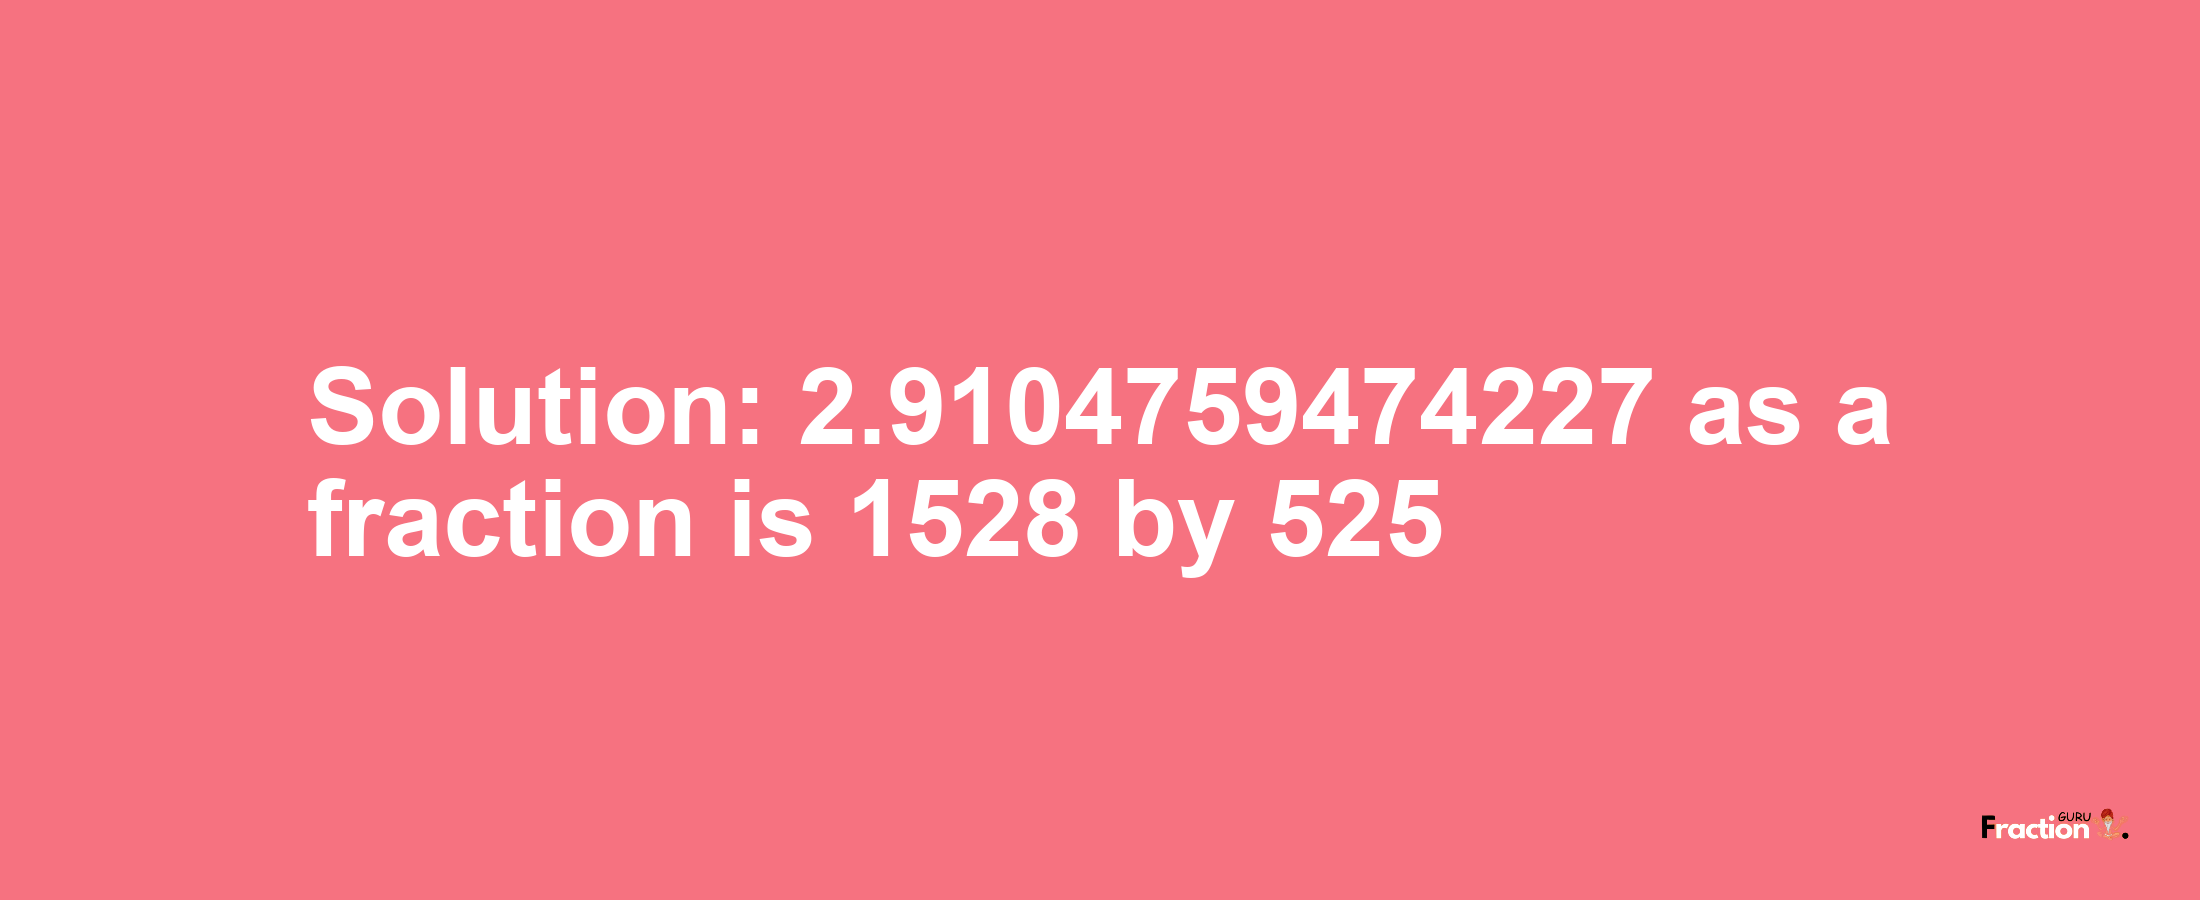 Solution:2.9104759474227 as a fraction is 1528/525